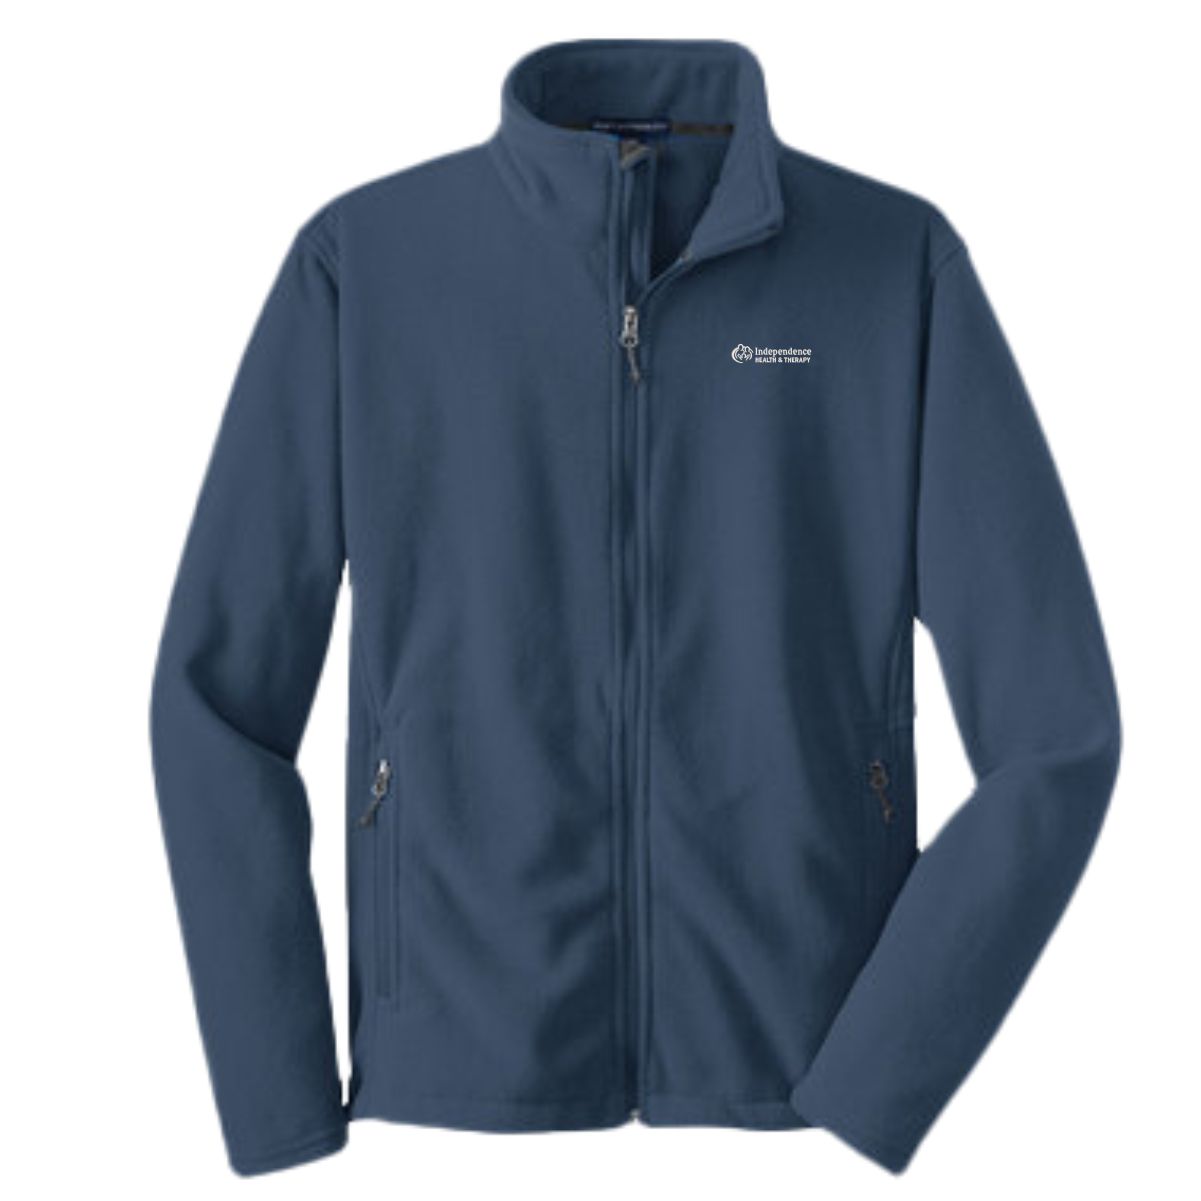 Independence Health & Therapy Fleece Jacket | HyperStitch, Inc